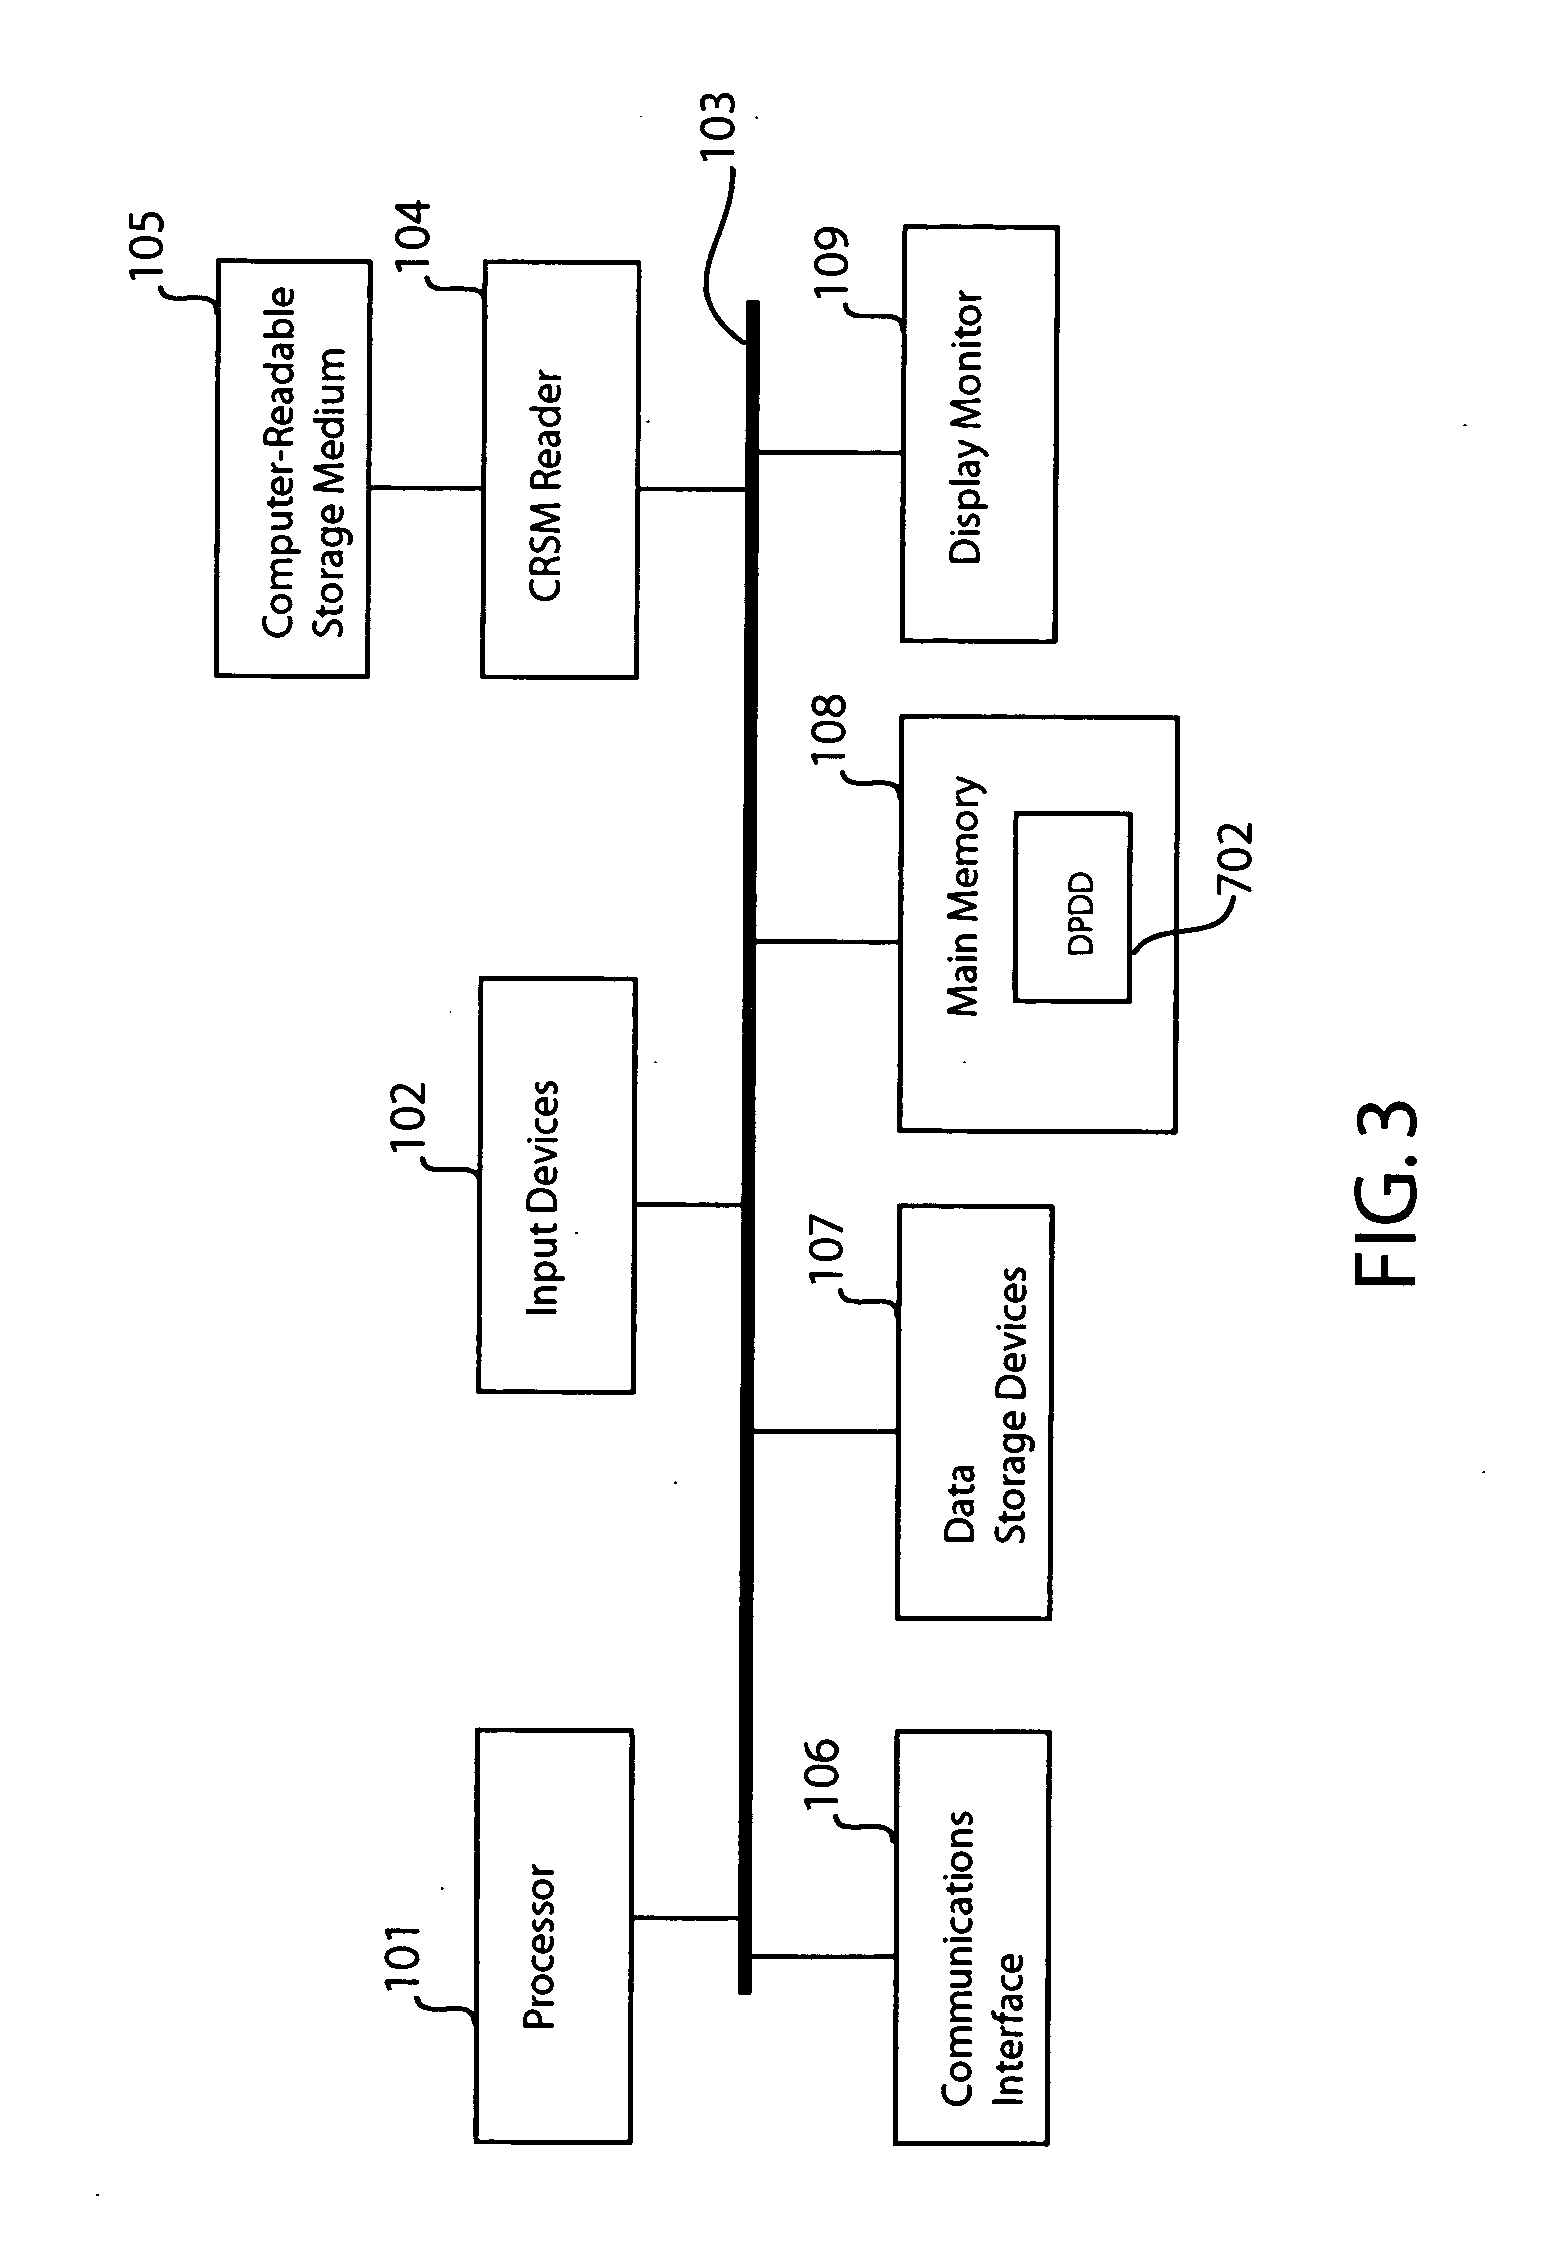 Method and apparatus for controlling traffic in a computer network